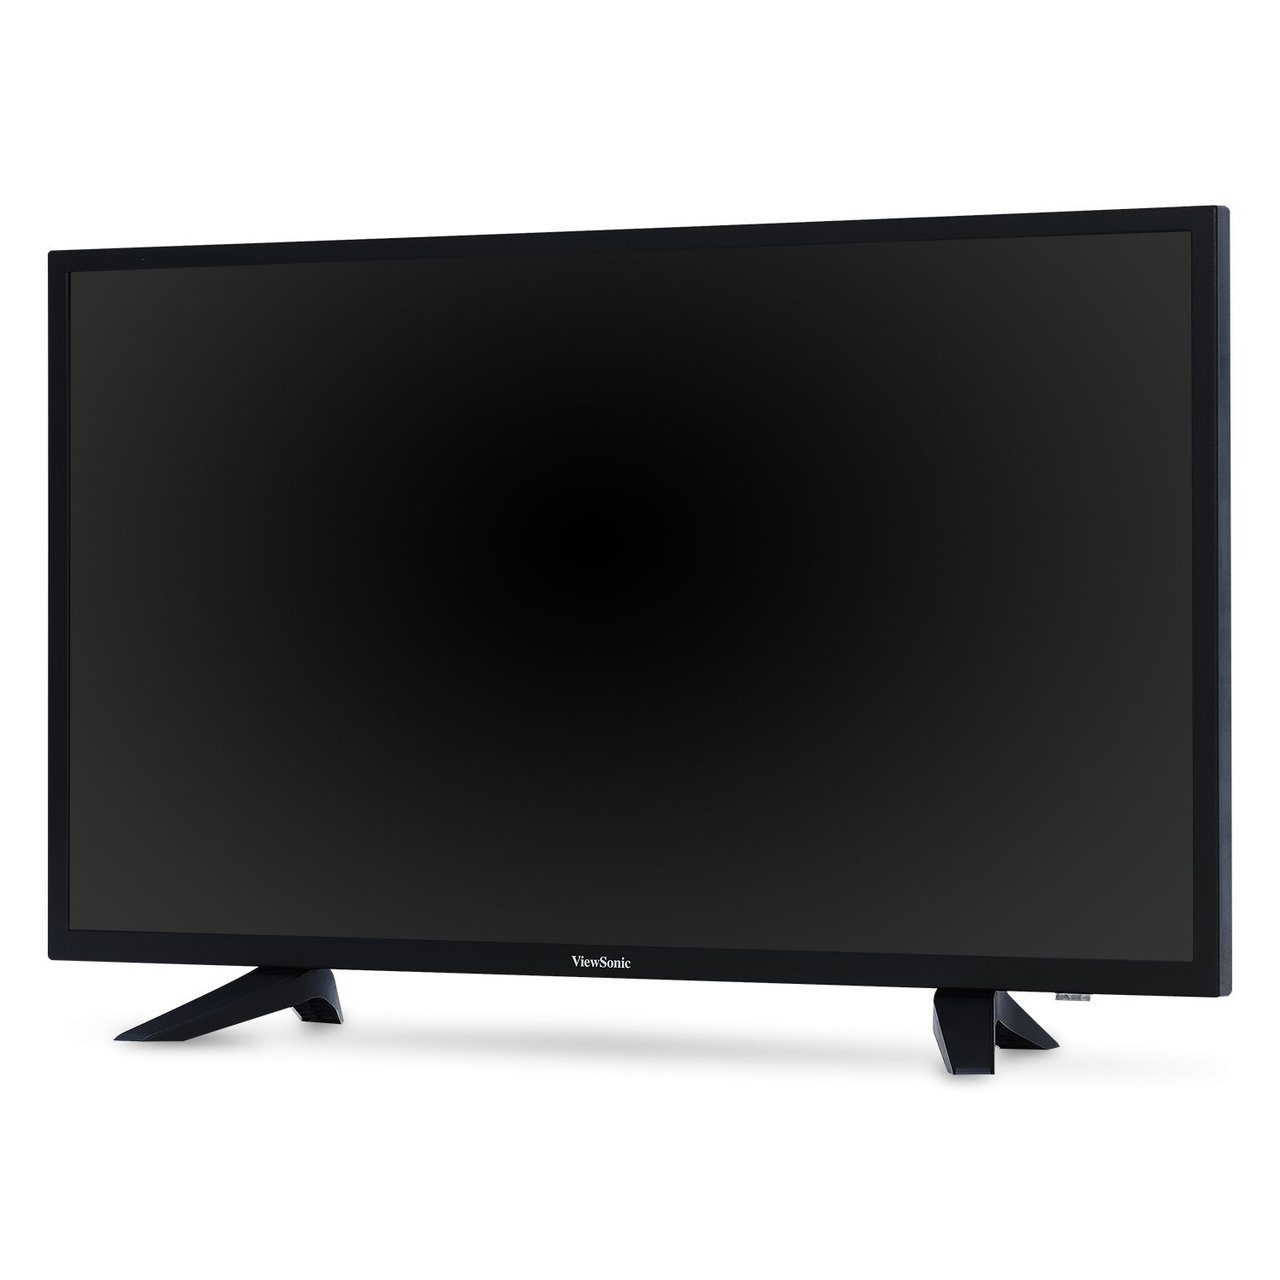 ViewSonic CDE3204-R 32" Full HD LED Commercial Display - C Grade Refurbished